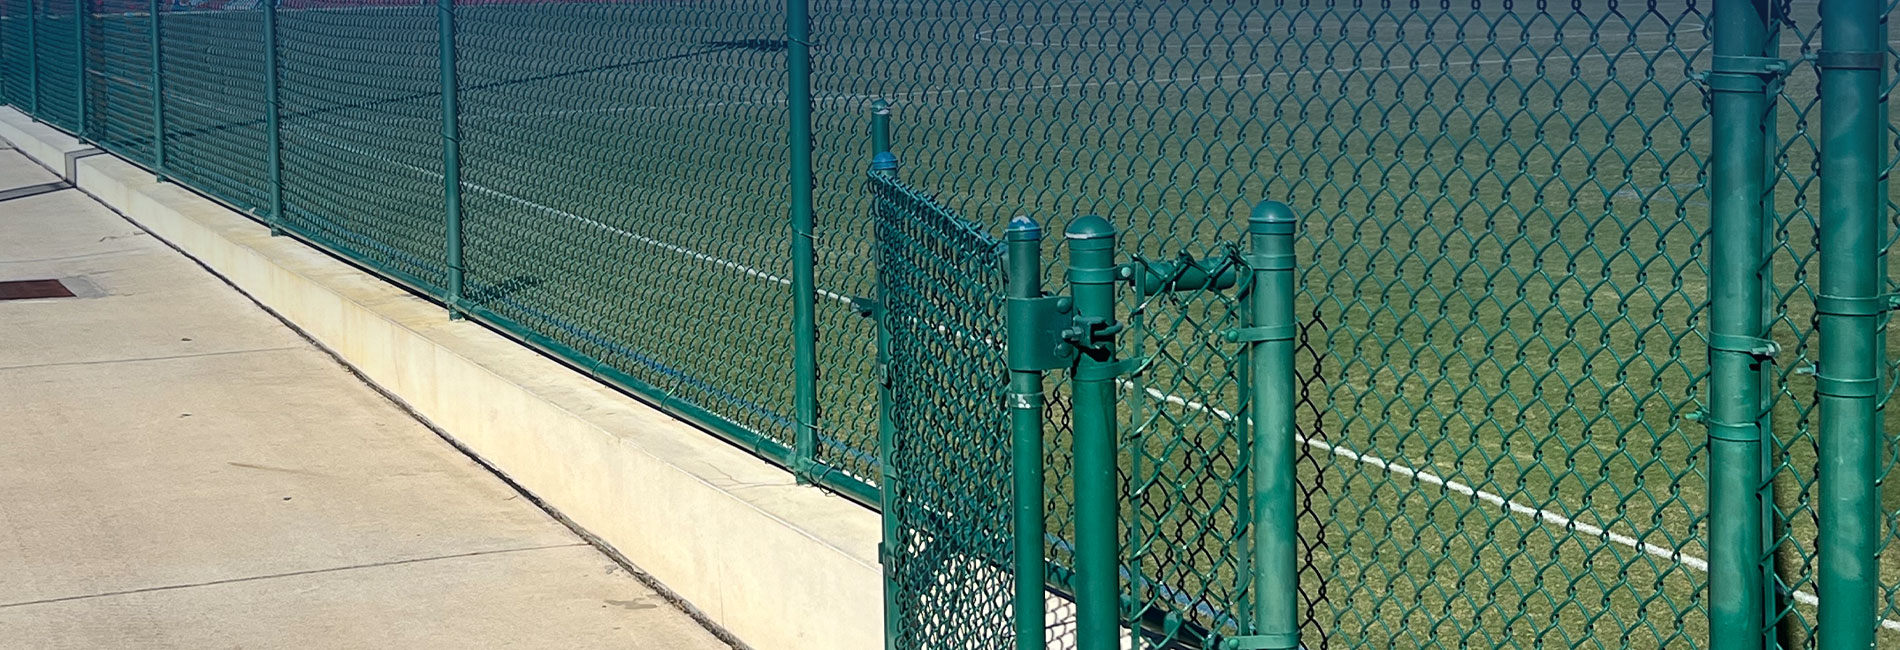 Green color coated tube with chain link fence